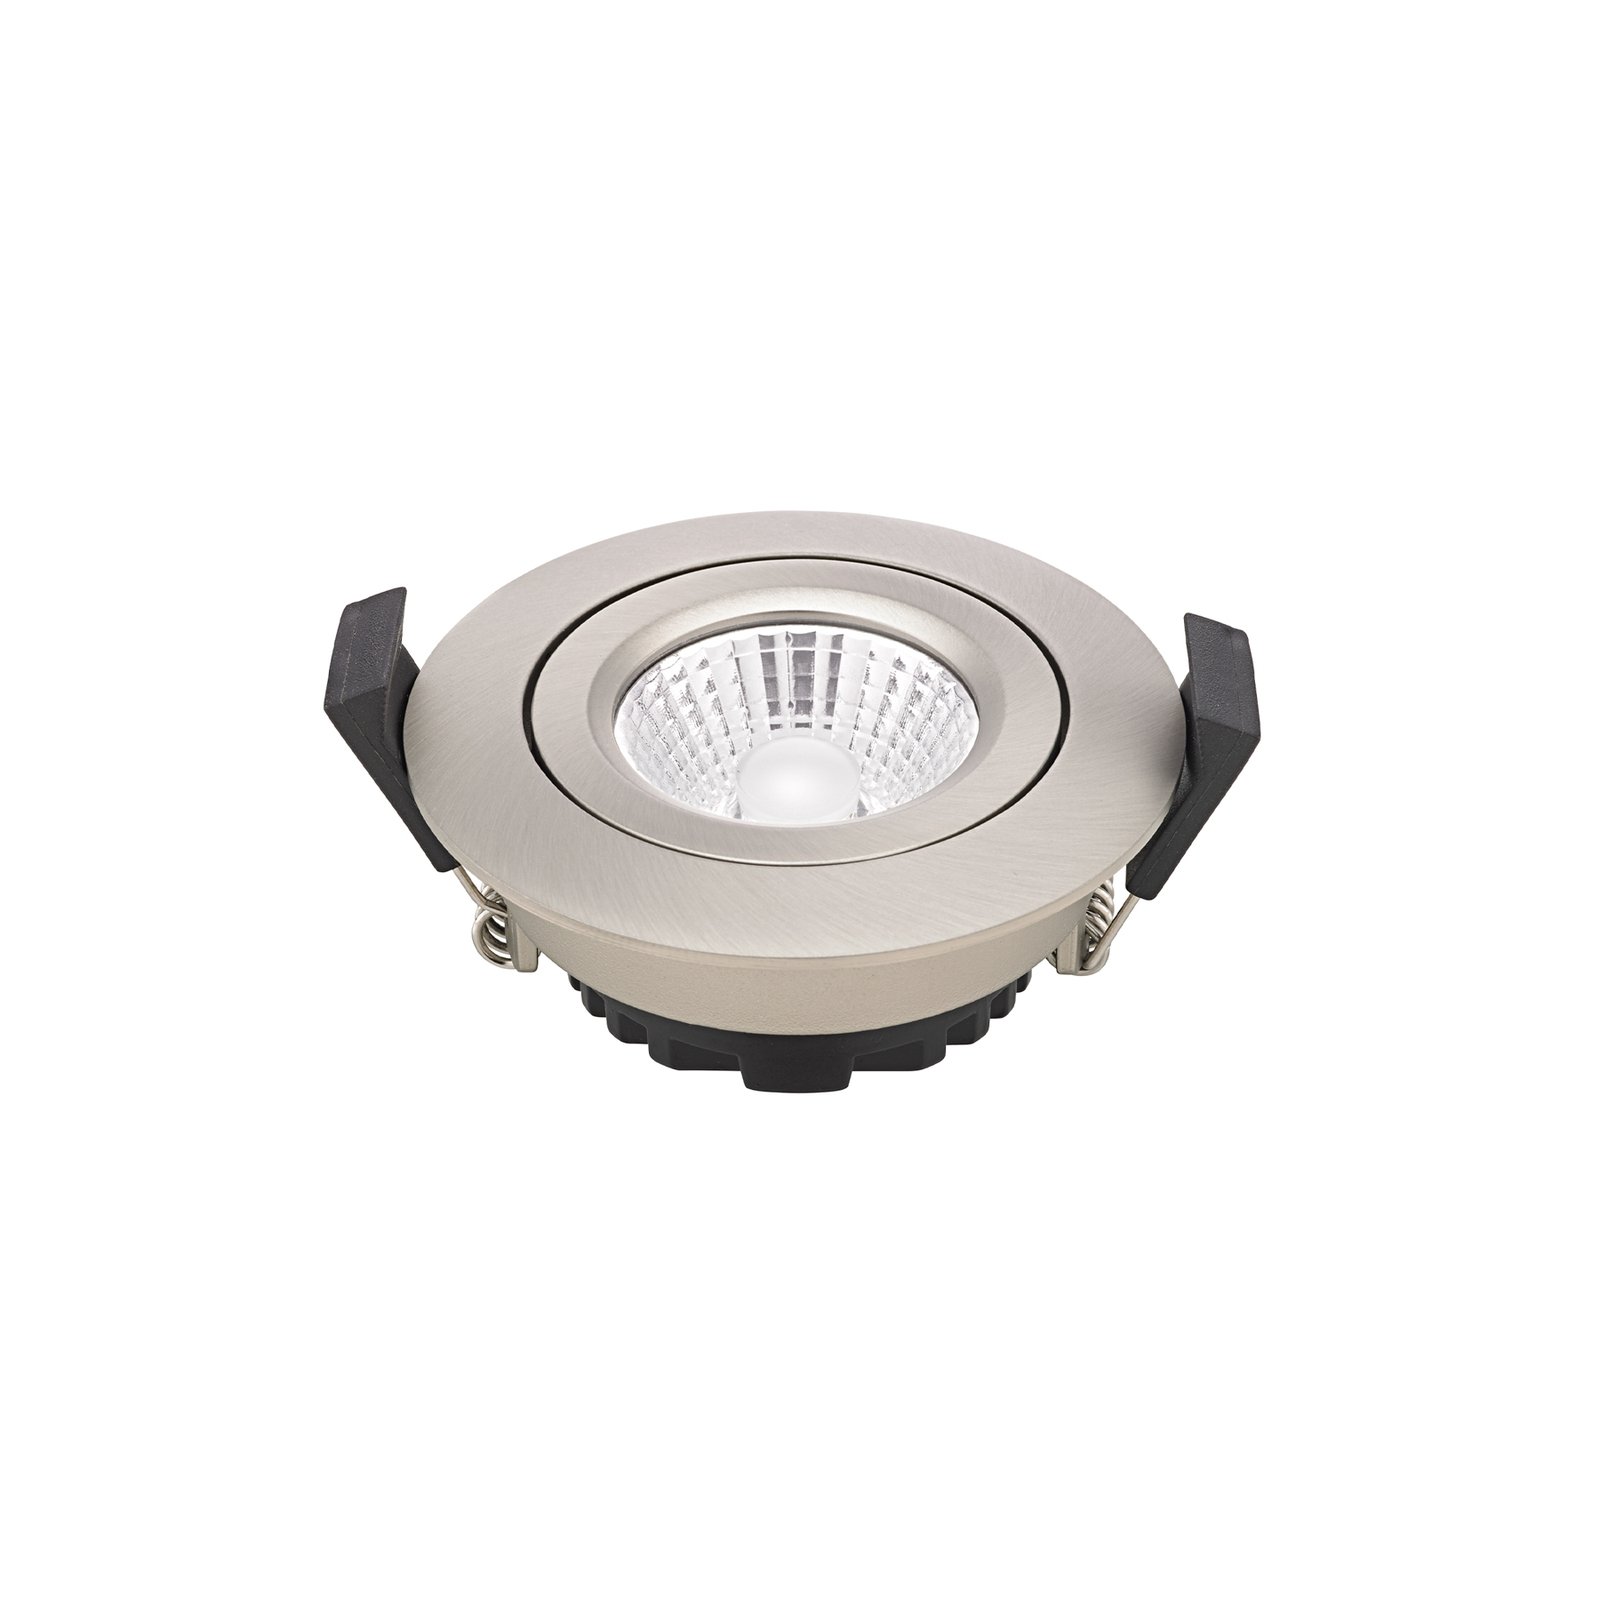 Diled LED recessed ceiling spotlight, Ø 8.5cm, 6 W, dimmable, steel